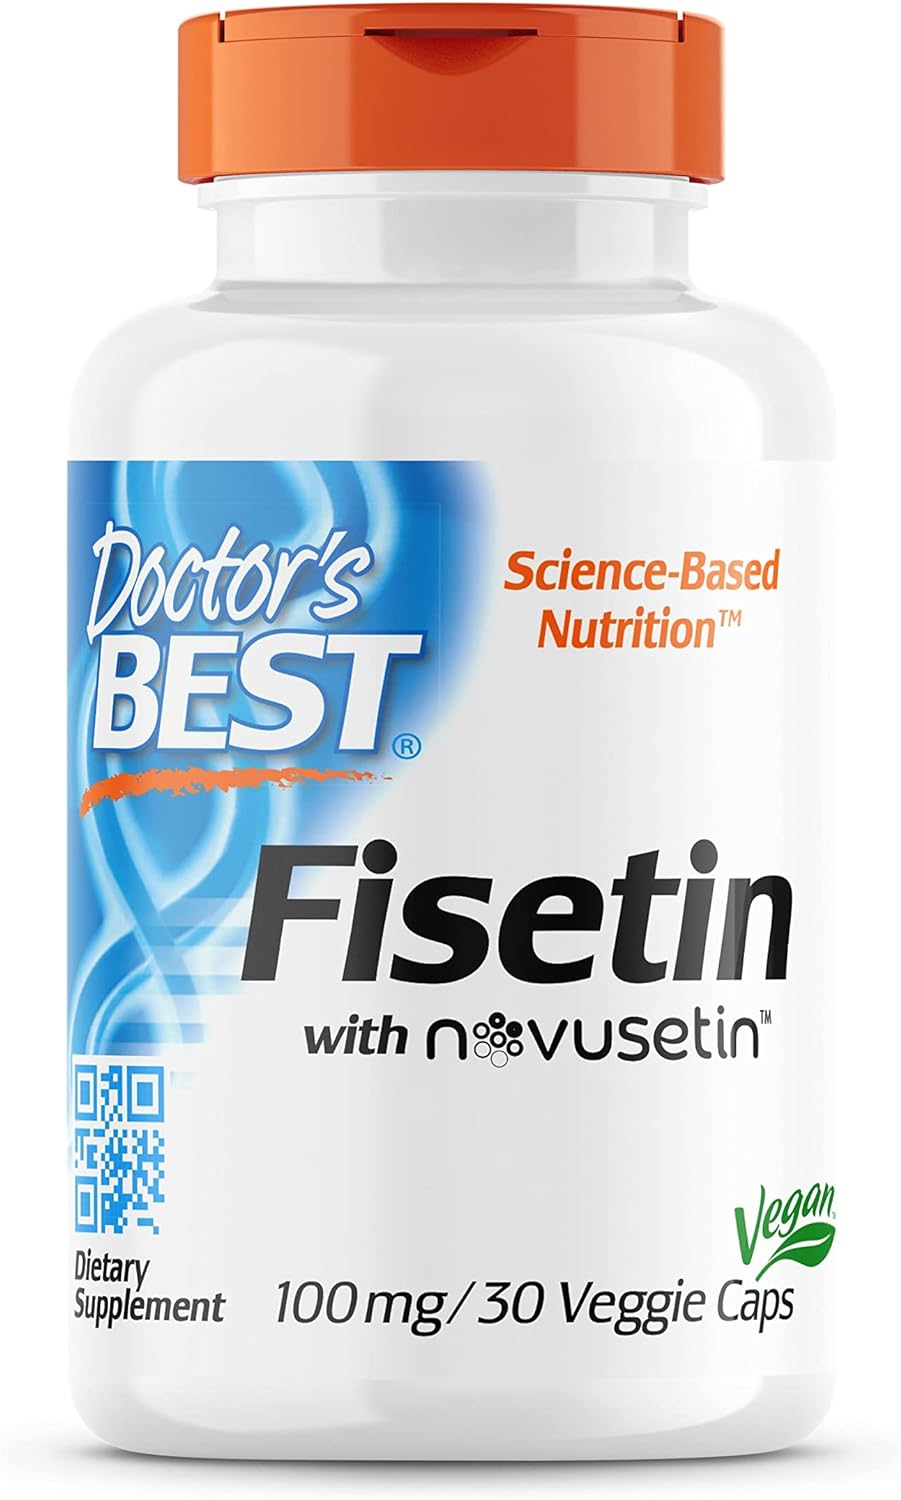 Photos - Vitamins & Minerals Doctors Best Doctor's Best Fisetin with Novusetin, 100mg - 30 vcaps PBW-P30722 